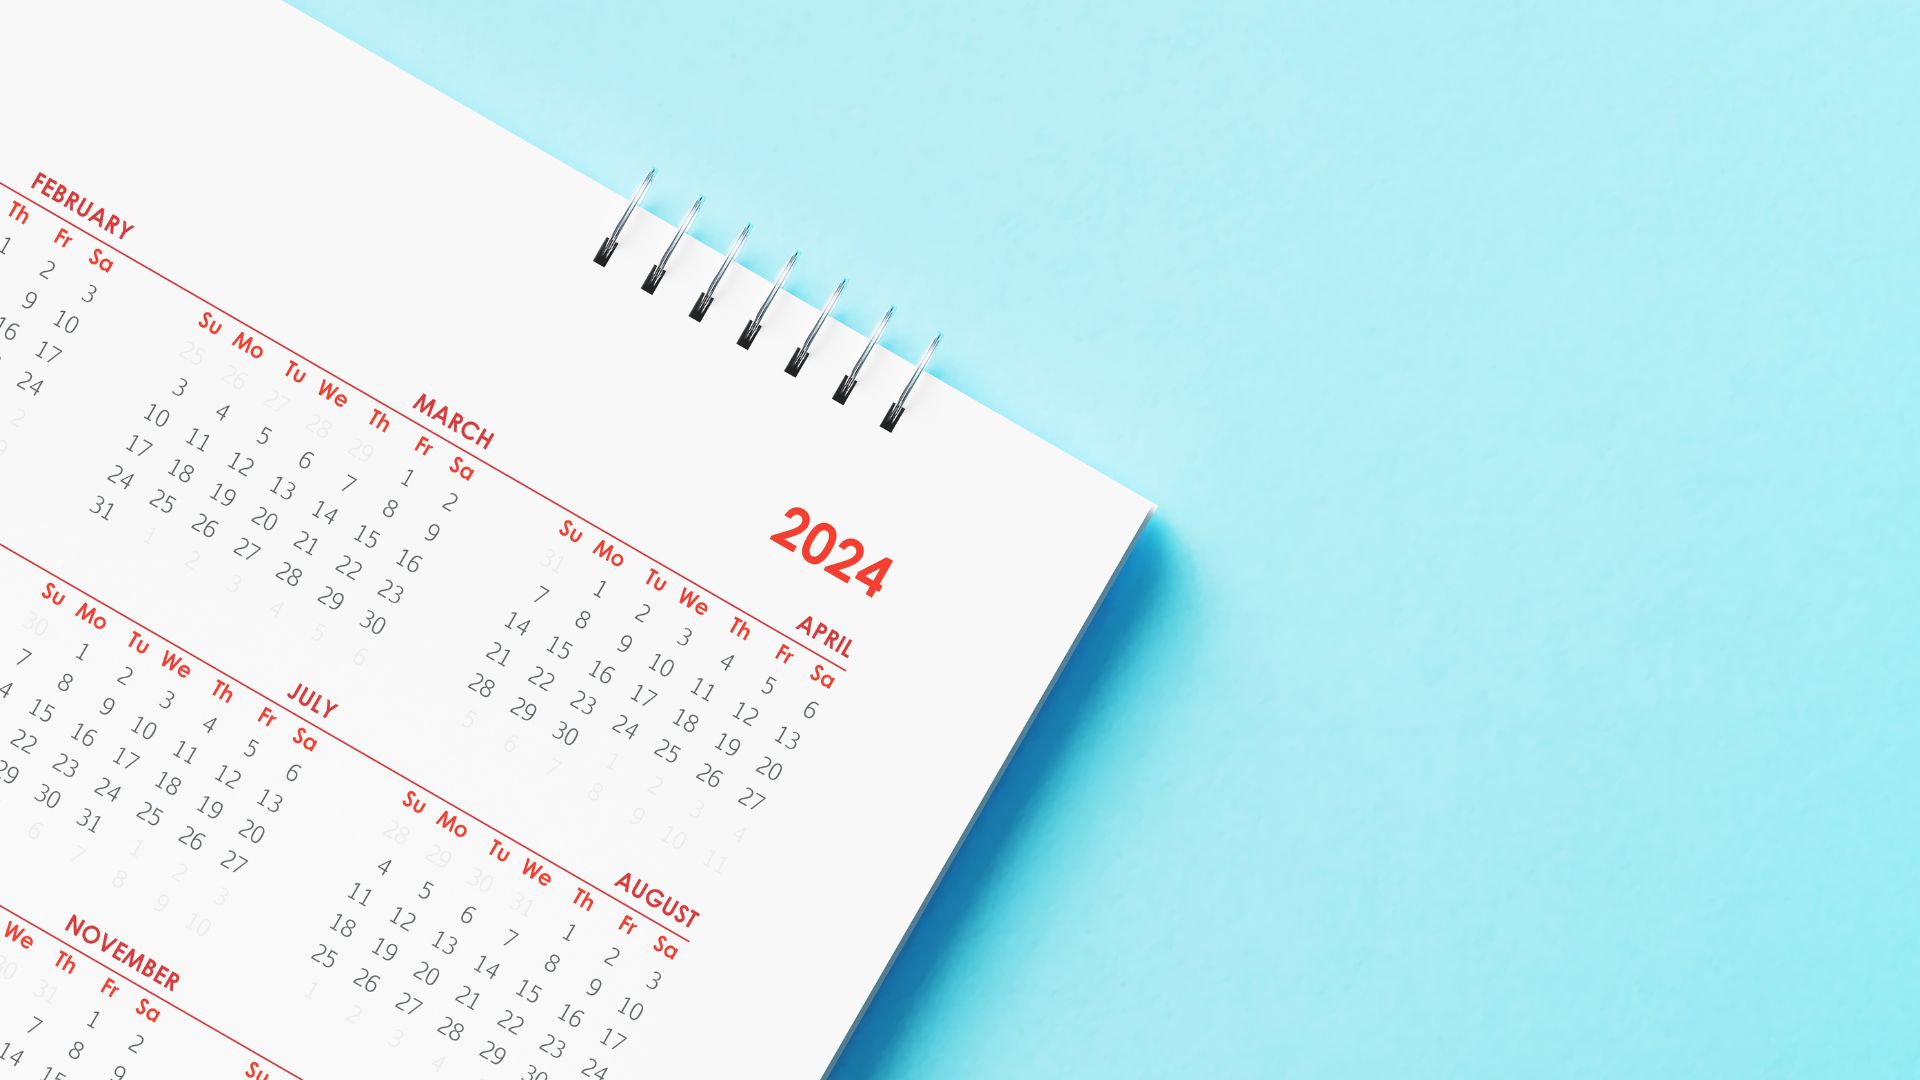 When's the right time to start making 2024 plans?